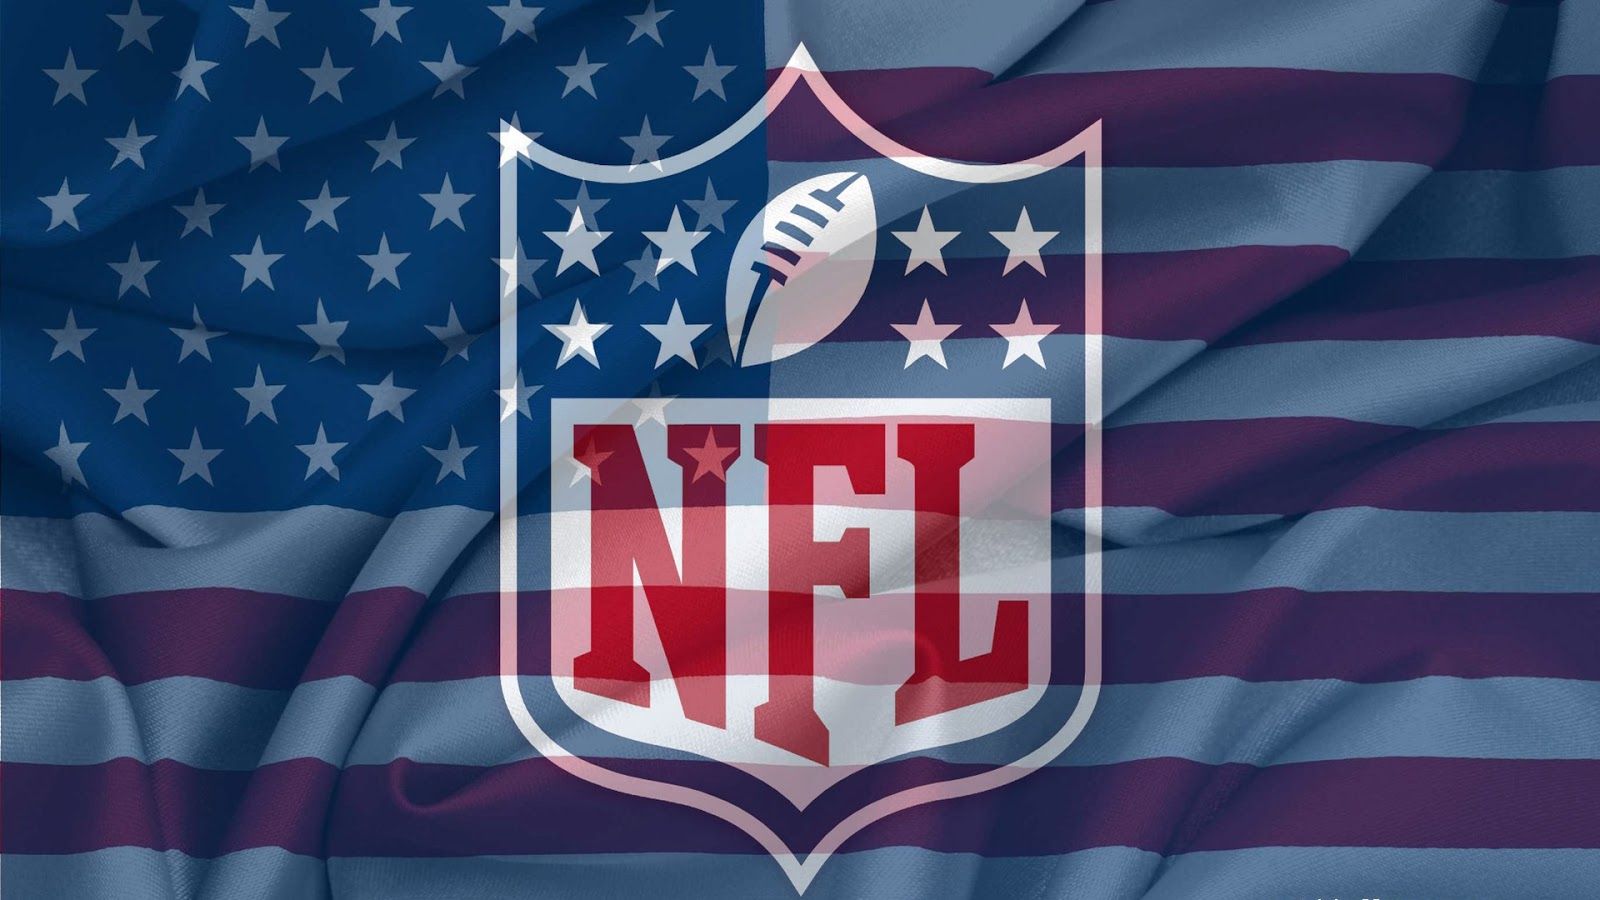 NFL 2012 Free Download NFL Football HD Wallpapers for iPad and other